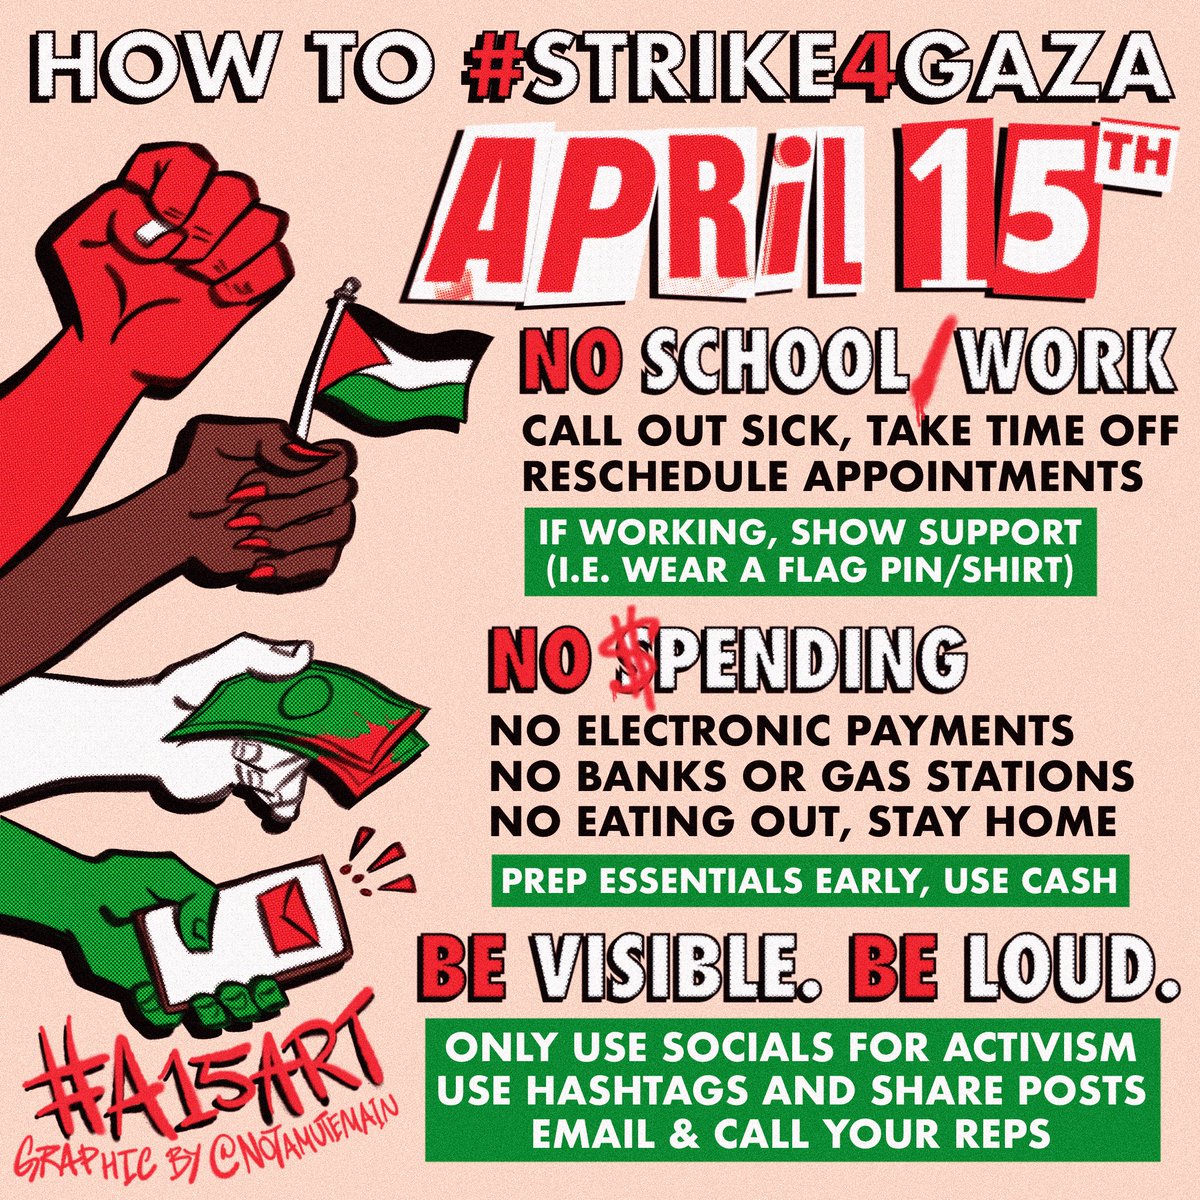 Since it's April 15 for me i'll be striking. Here is a thread of useful accounts and threads. #Strike4Gaza #StrikeForGaza